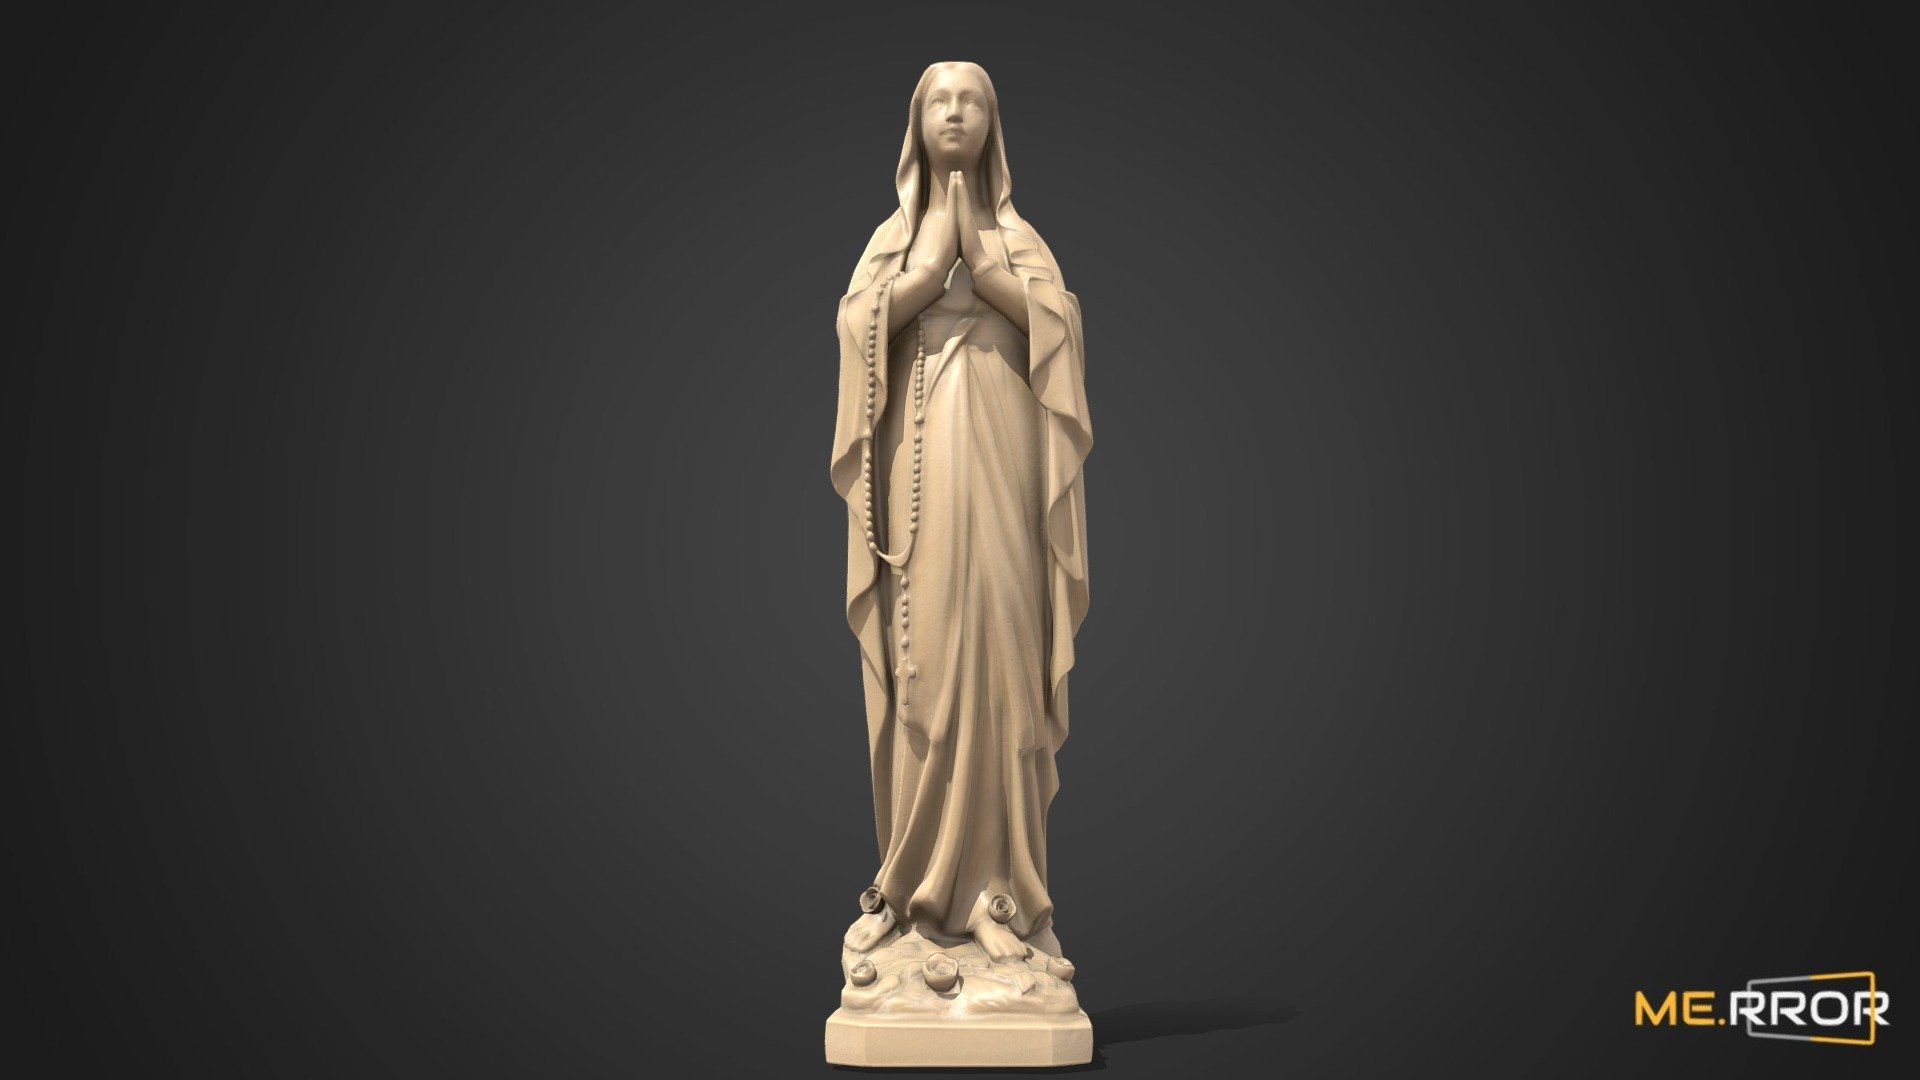 MERROR is a 3D Content PLATFORM which introduces various Asian assets to the 3D world


3DScanning #Photogrametry #ME.RROR - [Game-Ready] Saint Maria Statue - Buy Royalty Free 3D model by ME.RROR Studio (@merror) 3d model